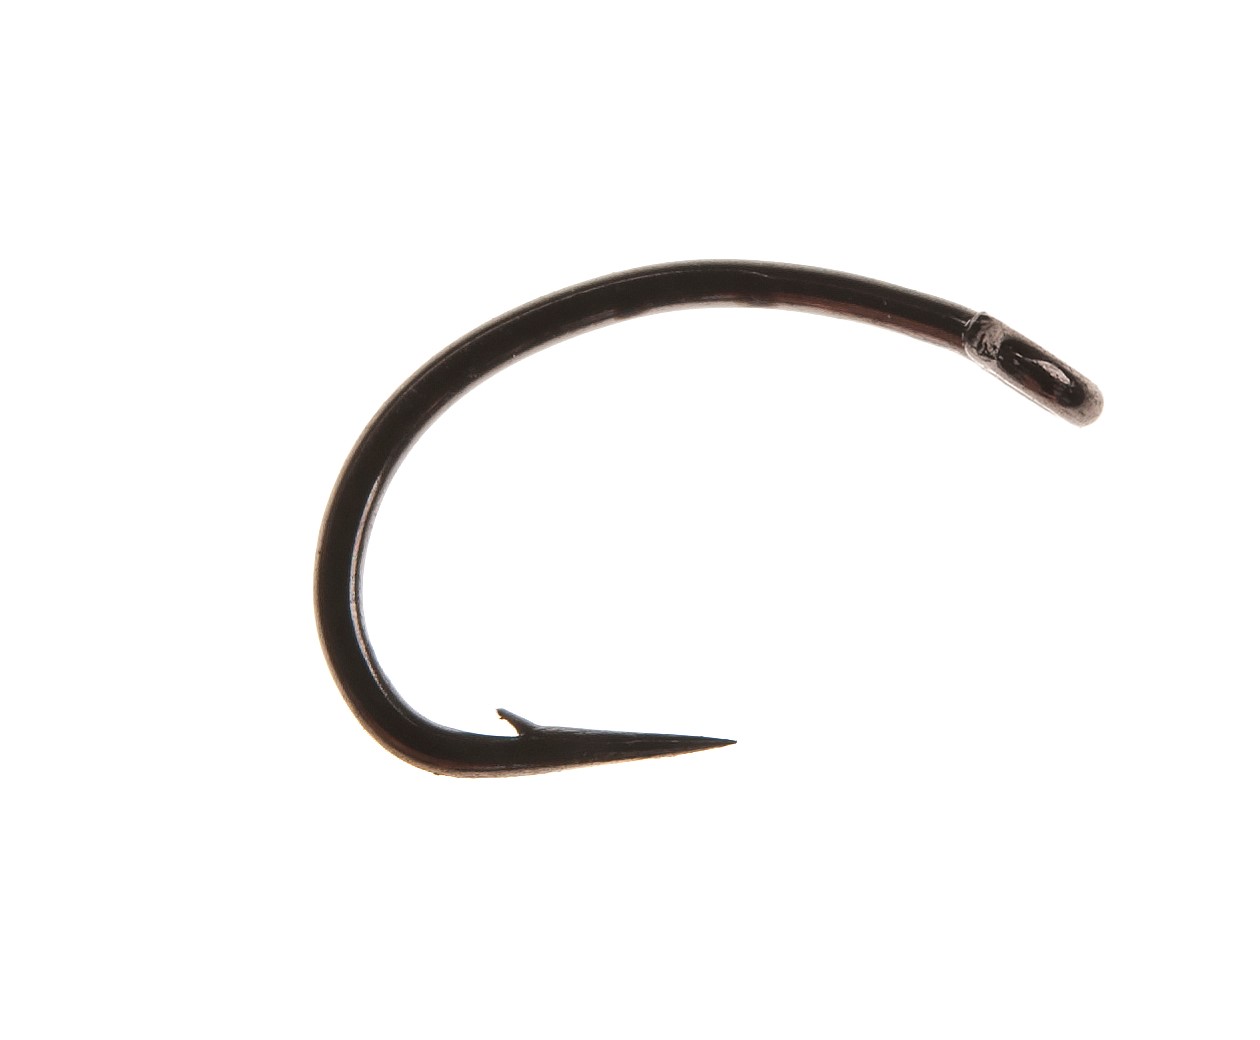 FW524 Freshwater Super Dry Fly Hook, AHREX